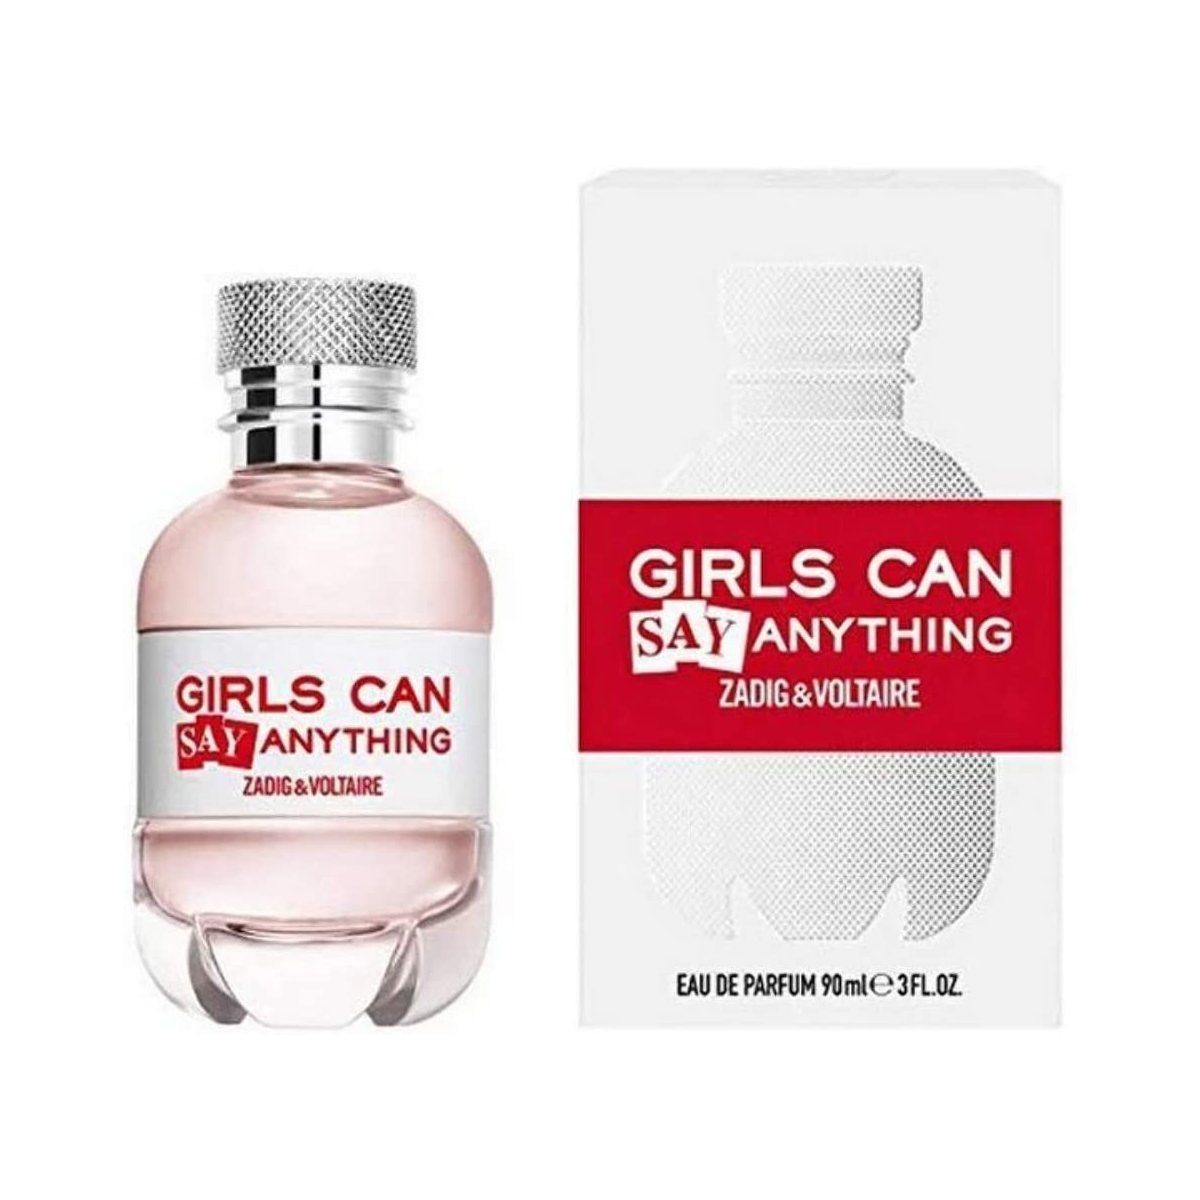 Girls can say anything 90 ml